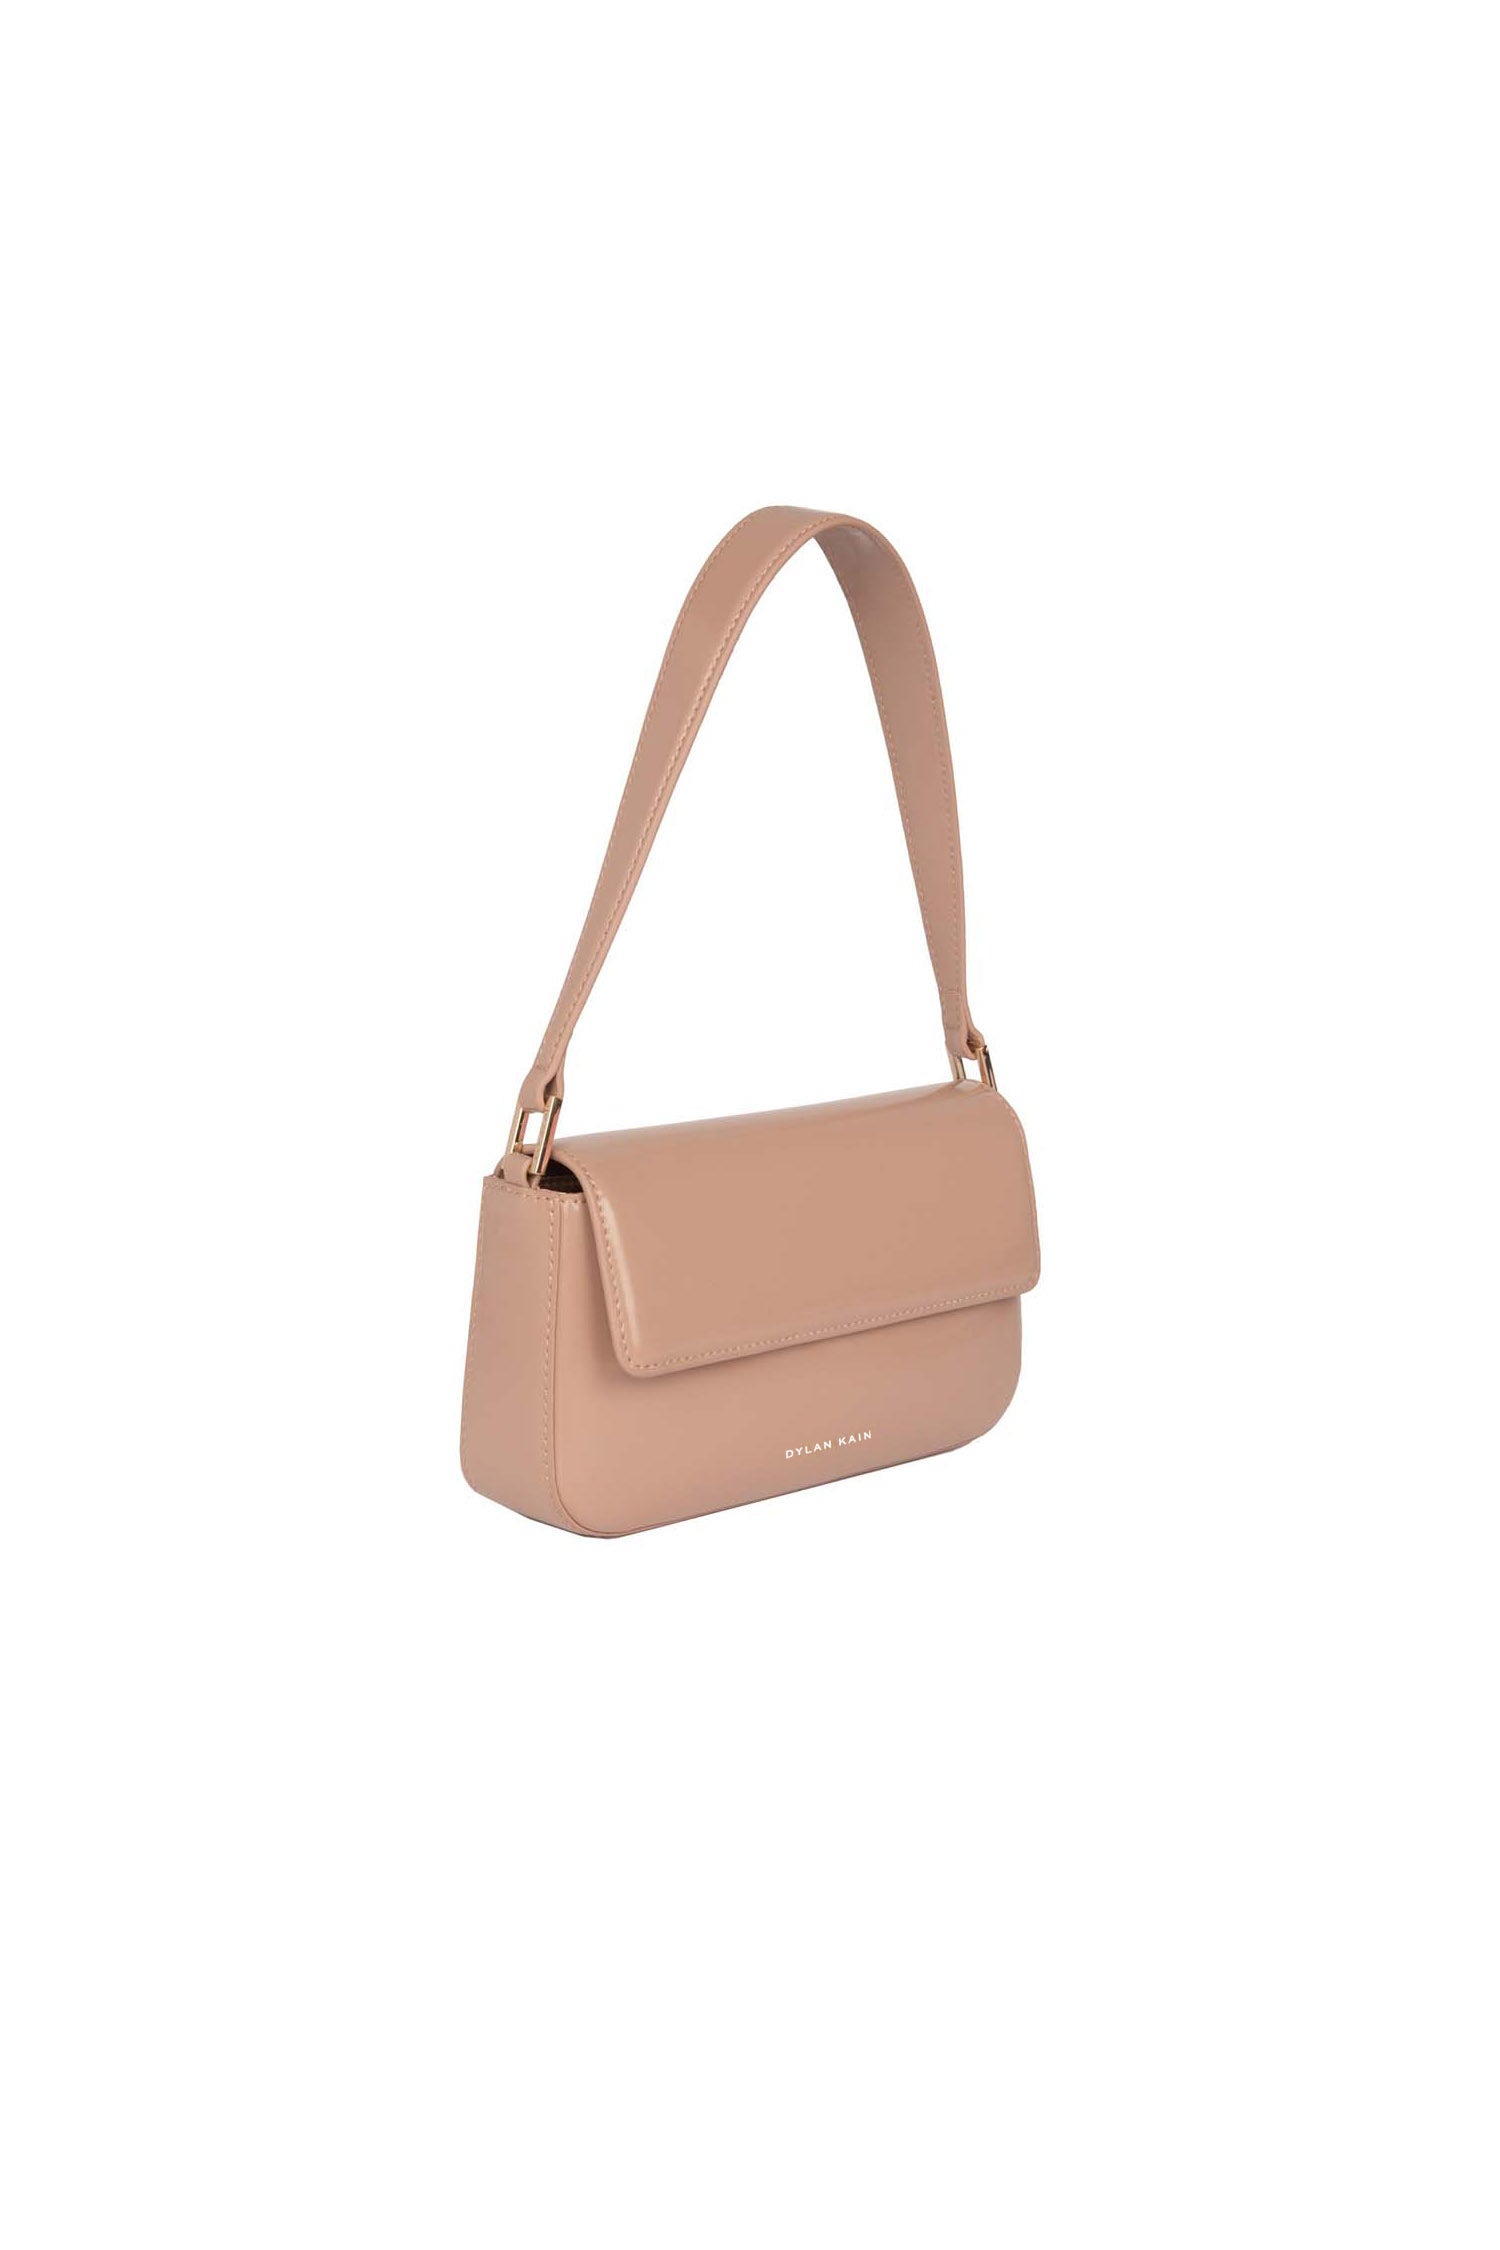 The Baguette Patent Bag Fawn Light Gold